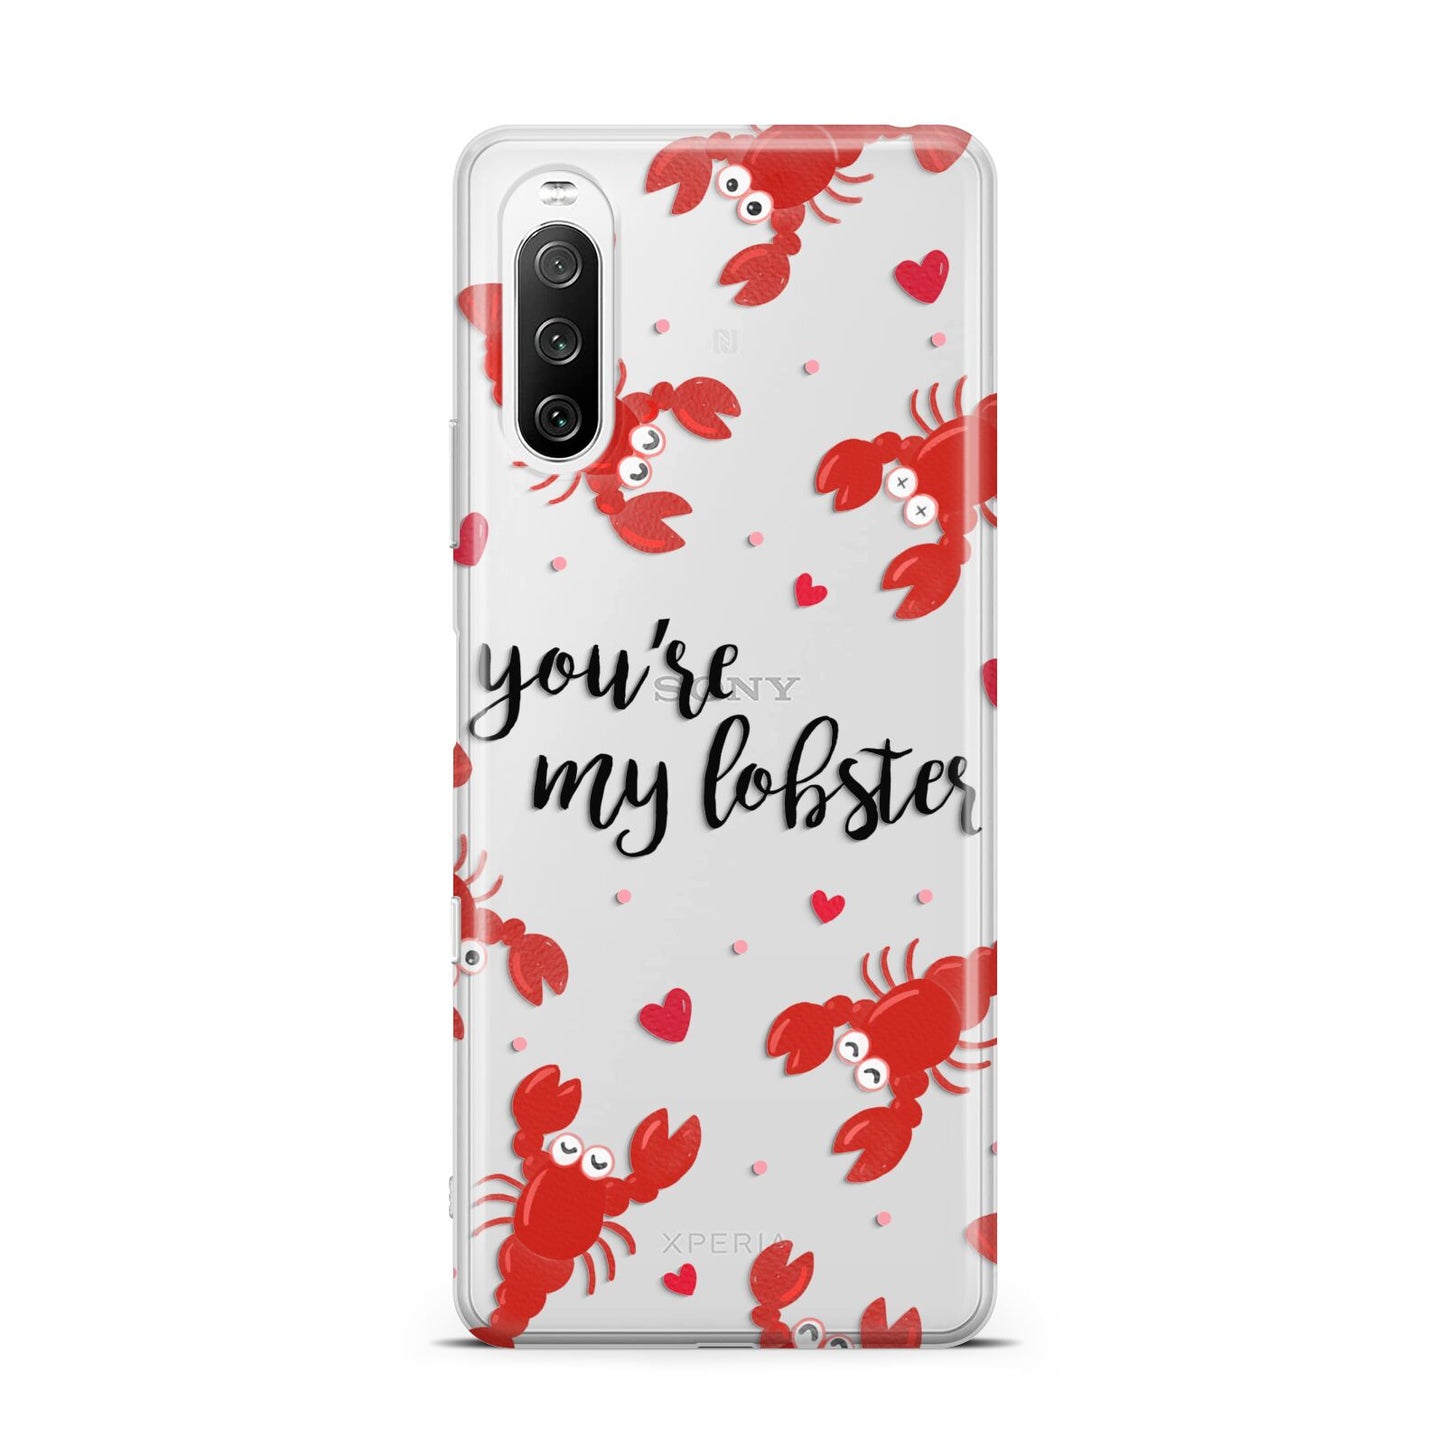 Youre My Lobster Sony Xperia 10 III Case